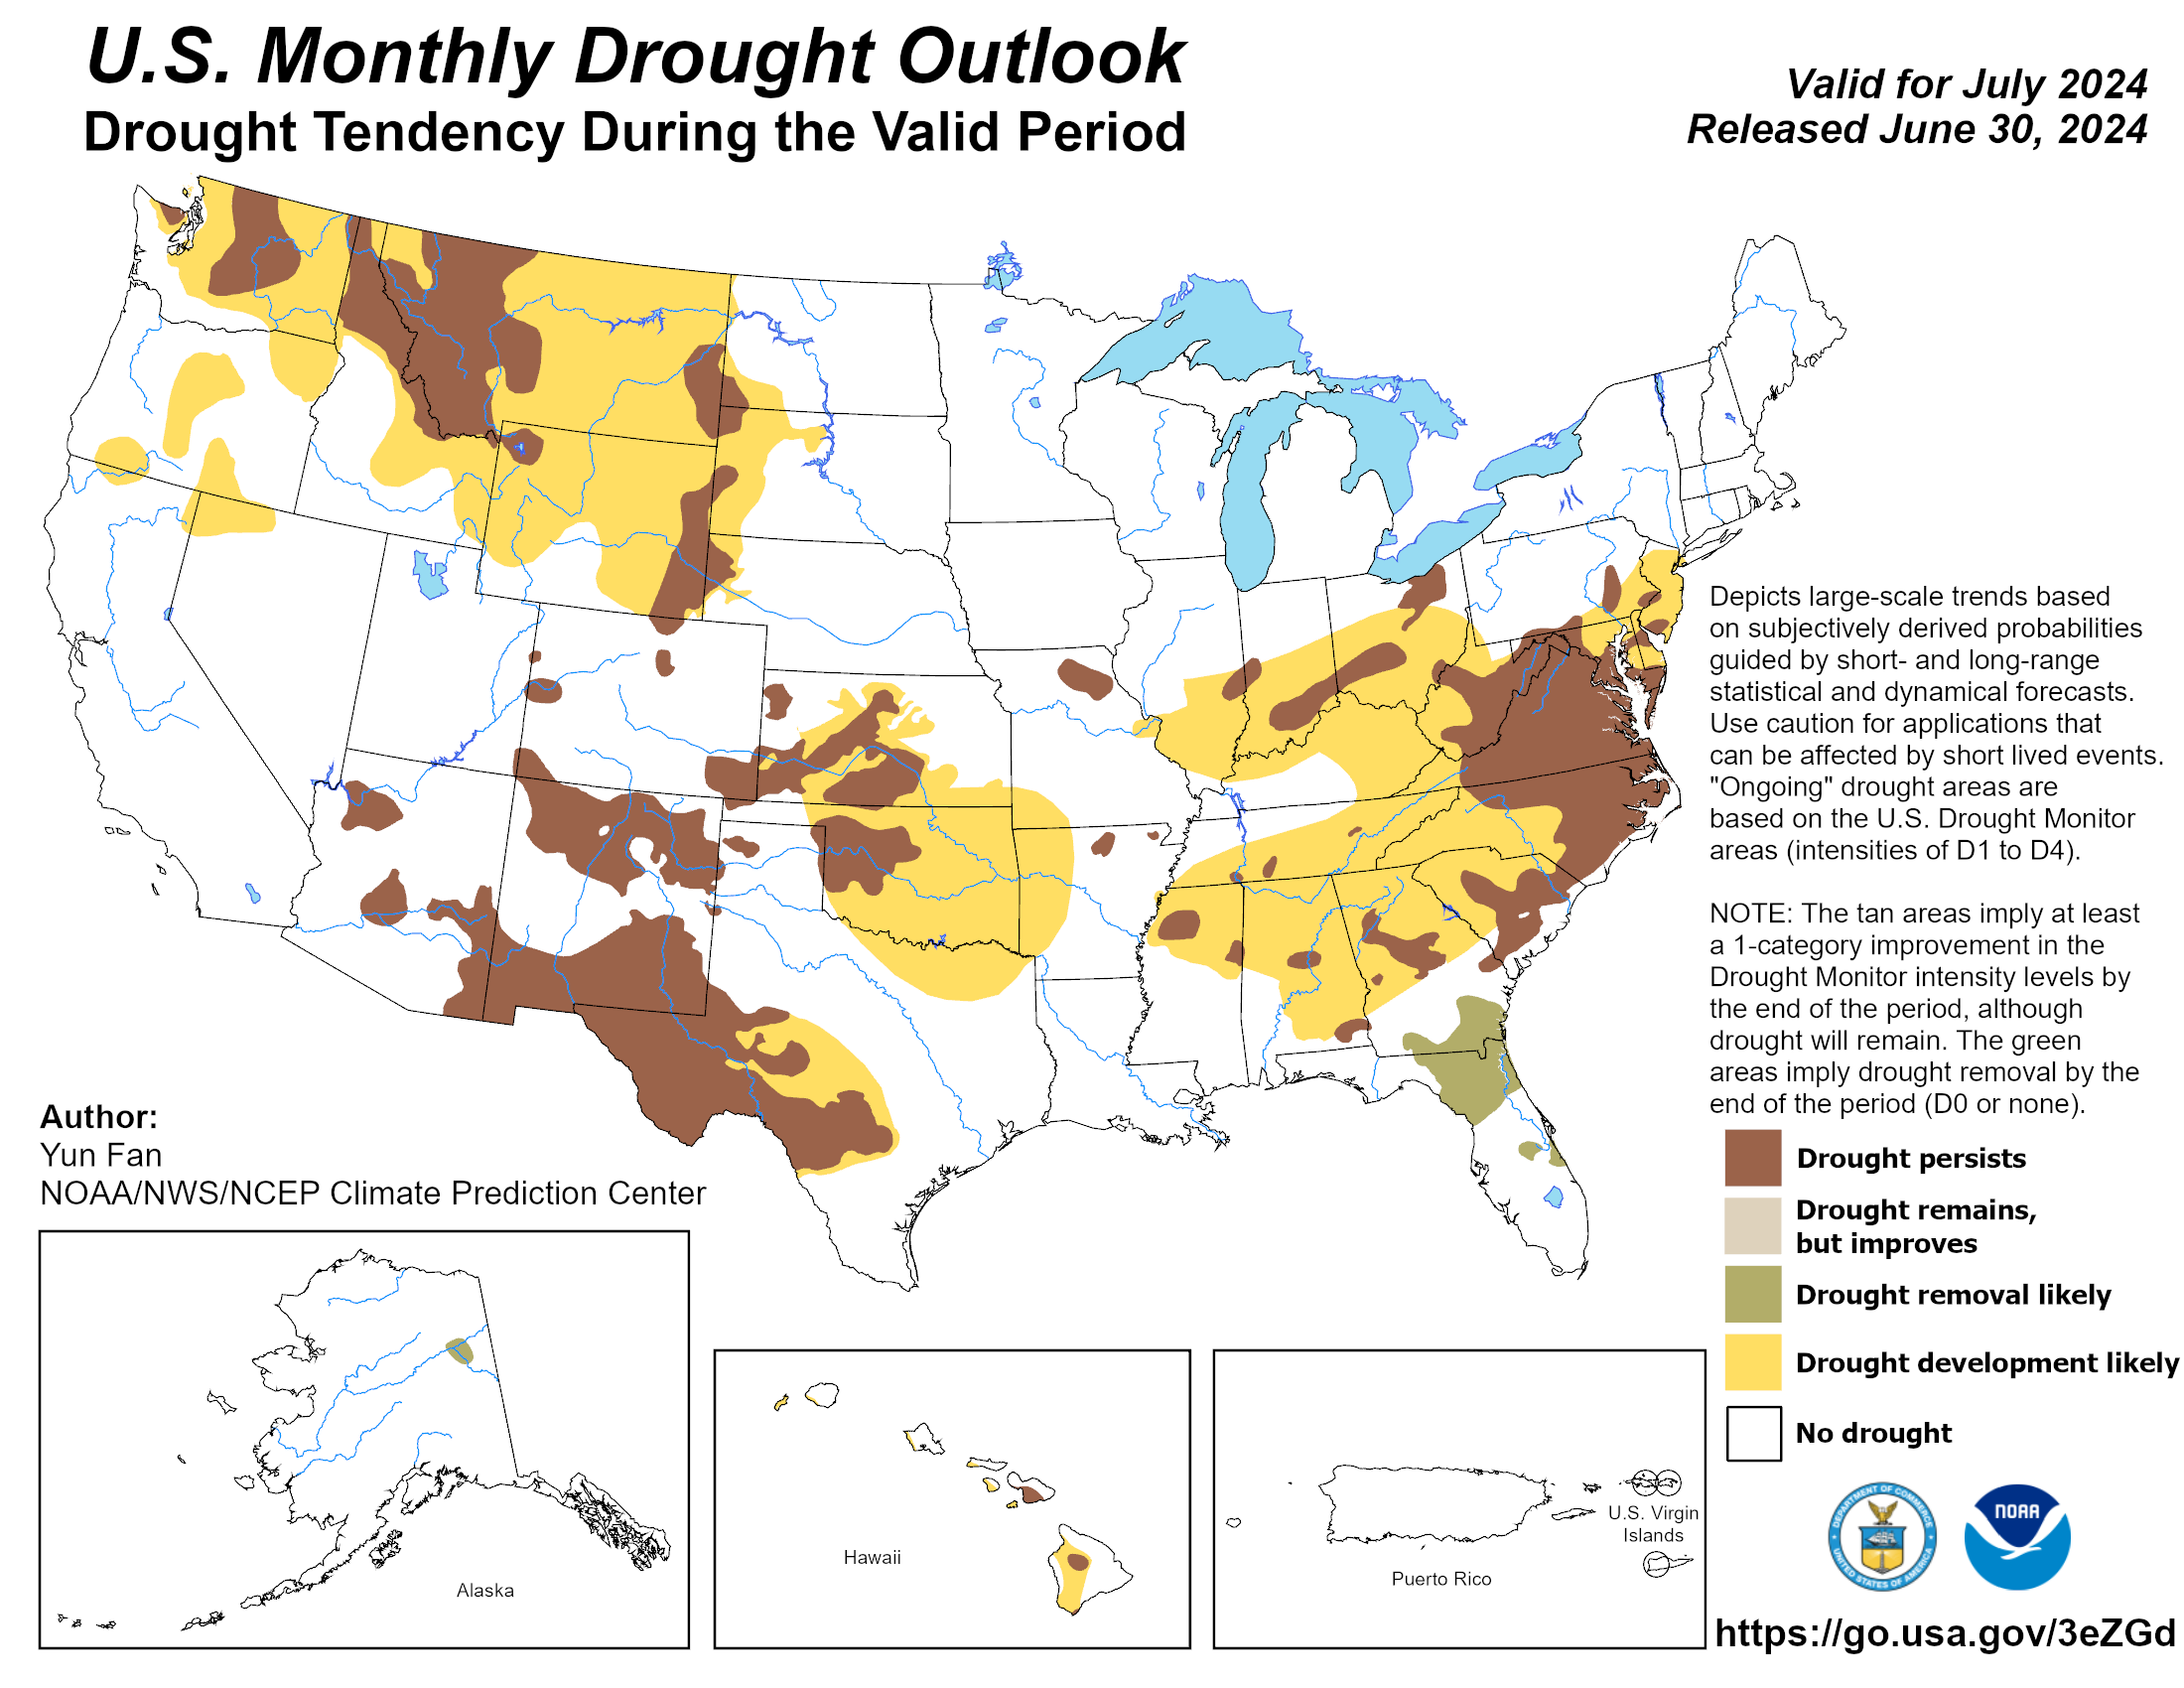 United States Monthly Drought Outlook Graphic - click on image to enlarge